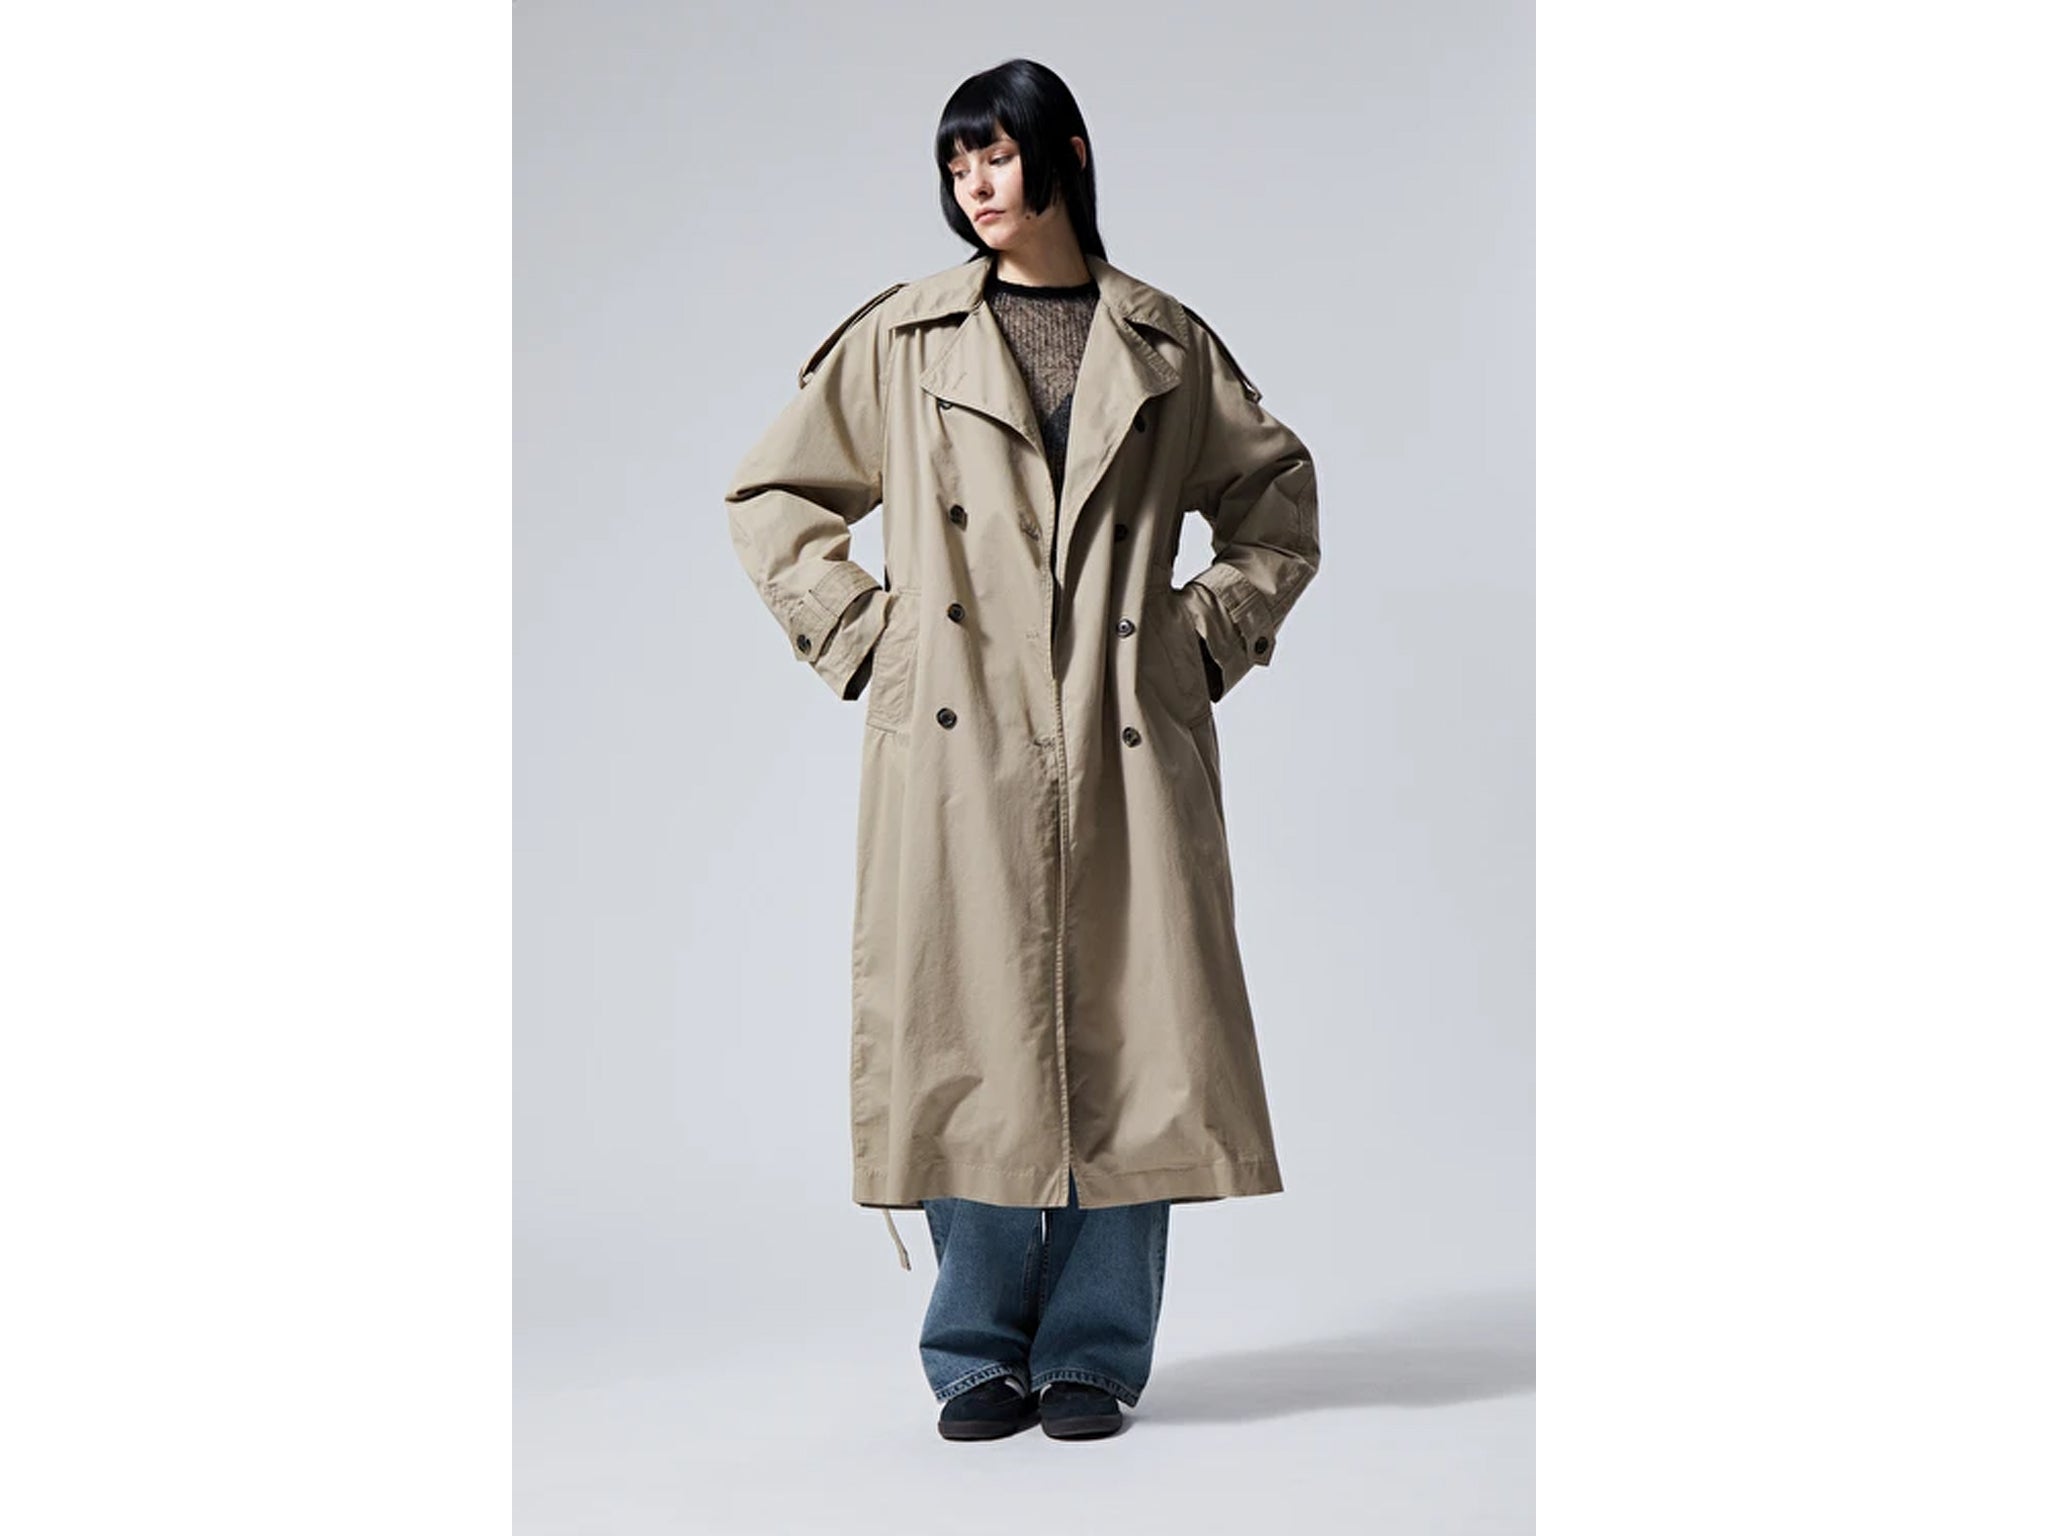 Best women's trench coat 2023: Oversized, leather, denim and more